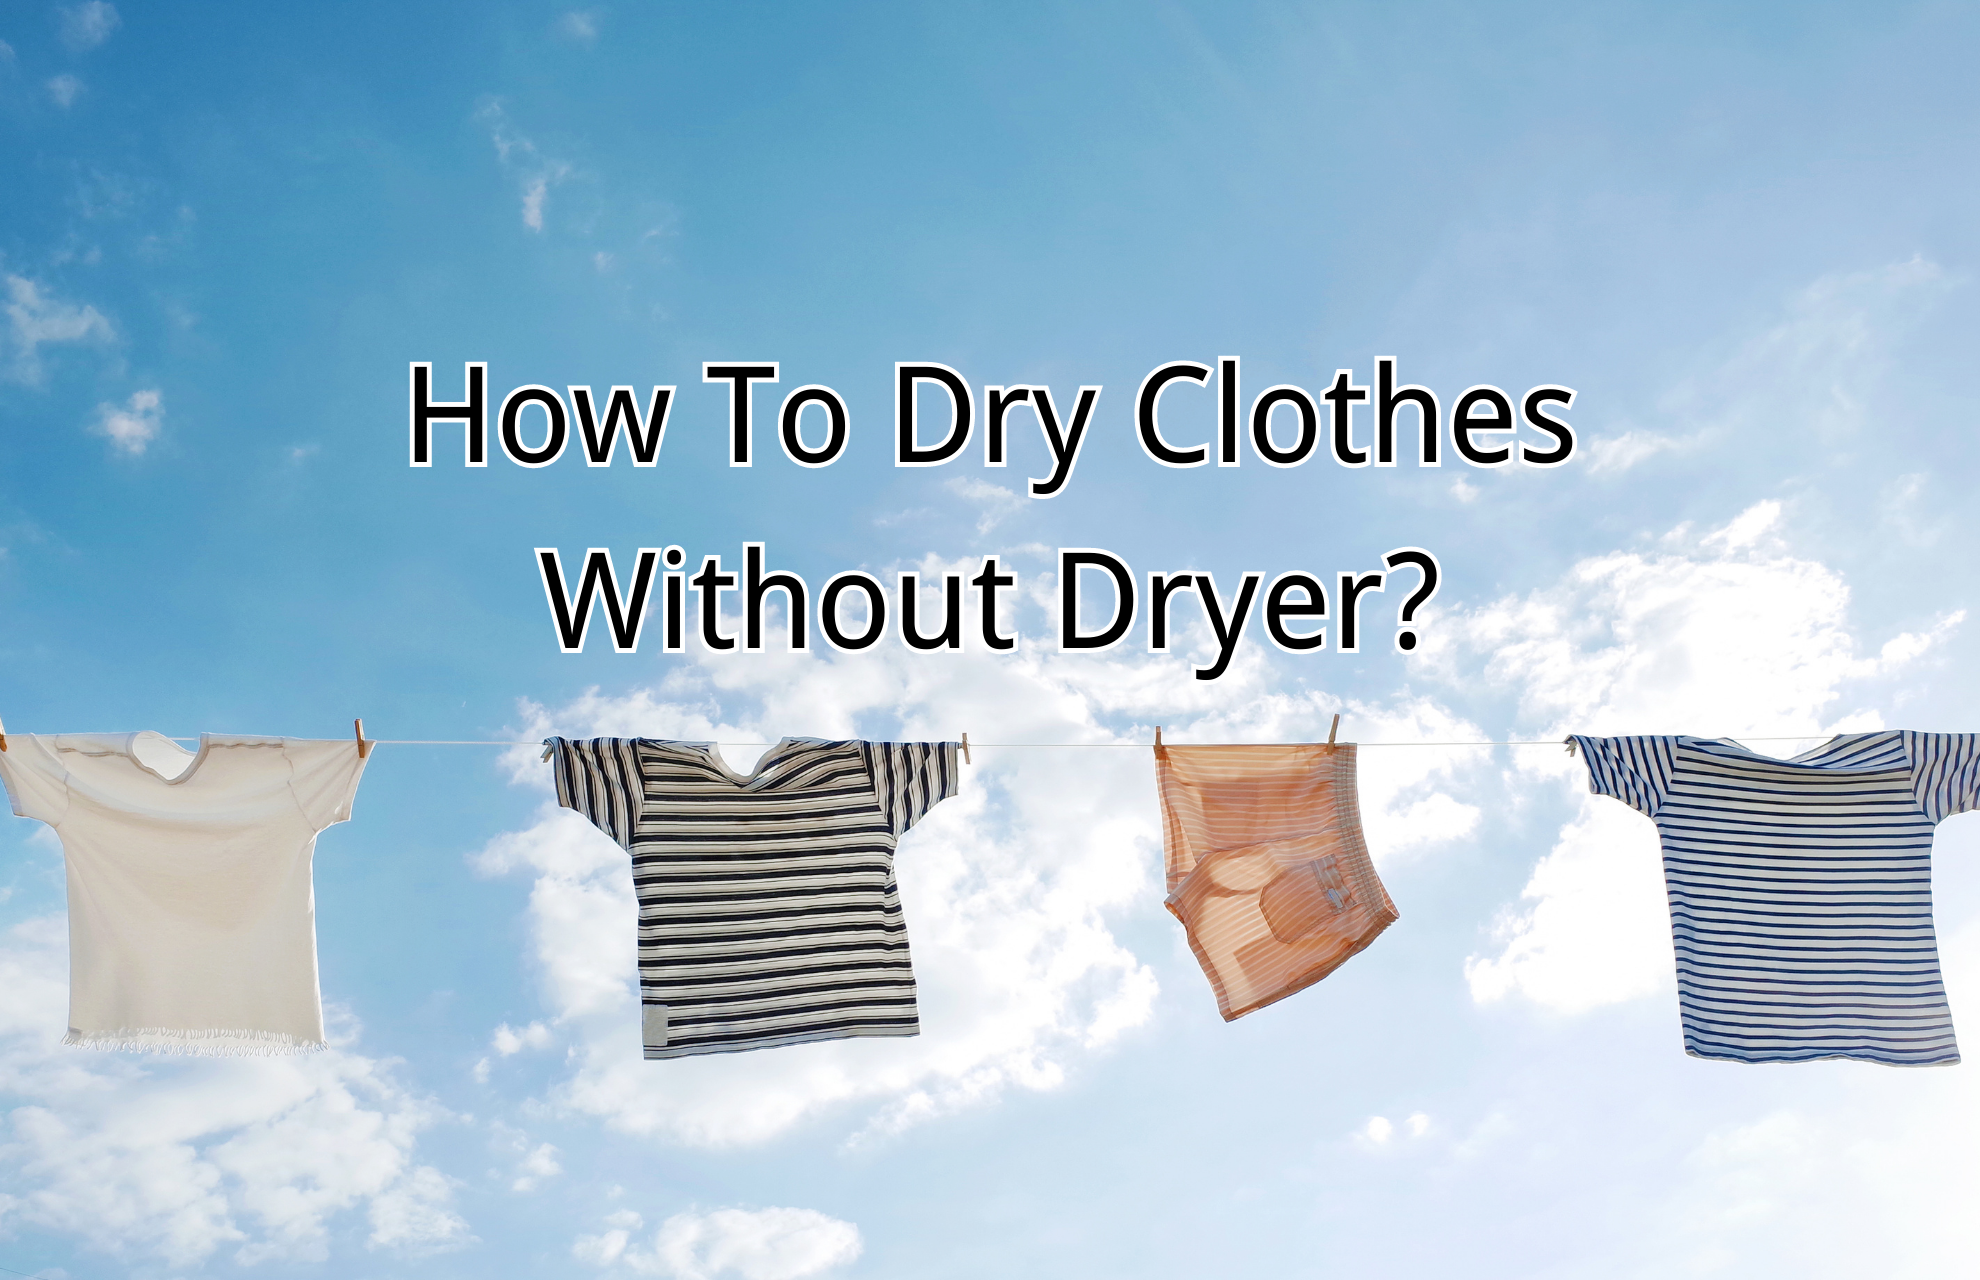 How To Dry Clothes Without Dryer?